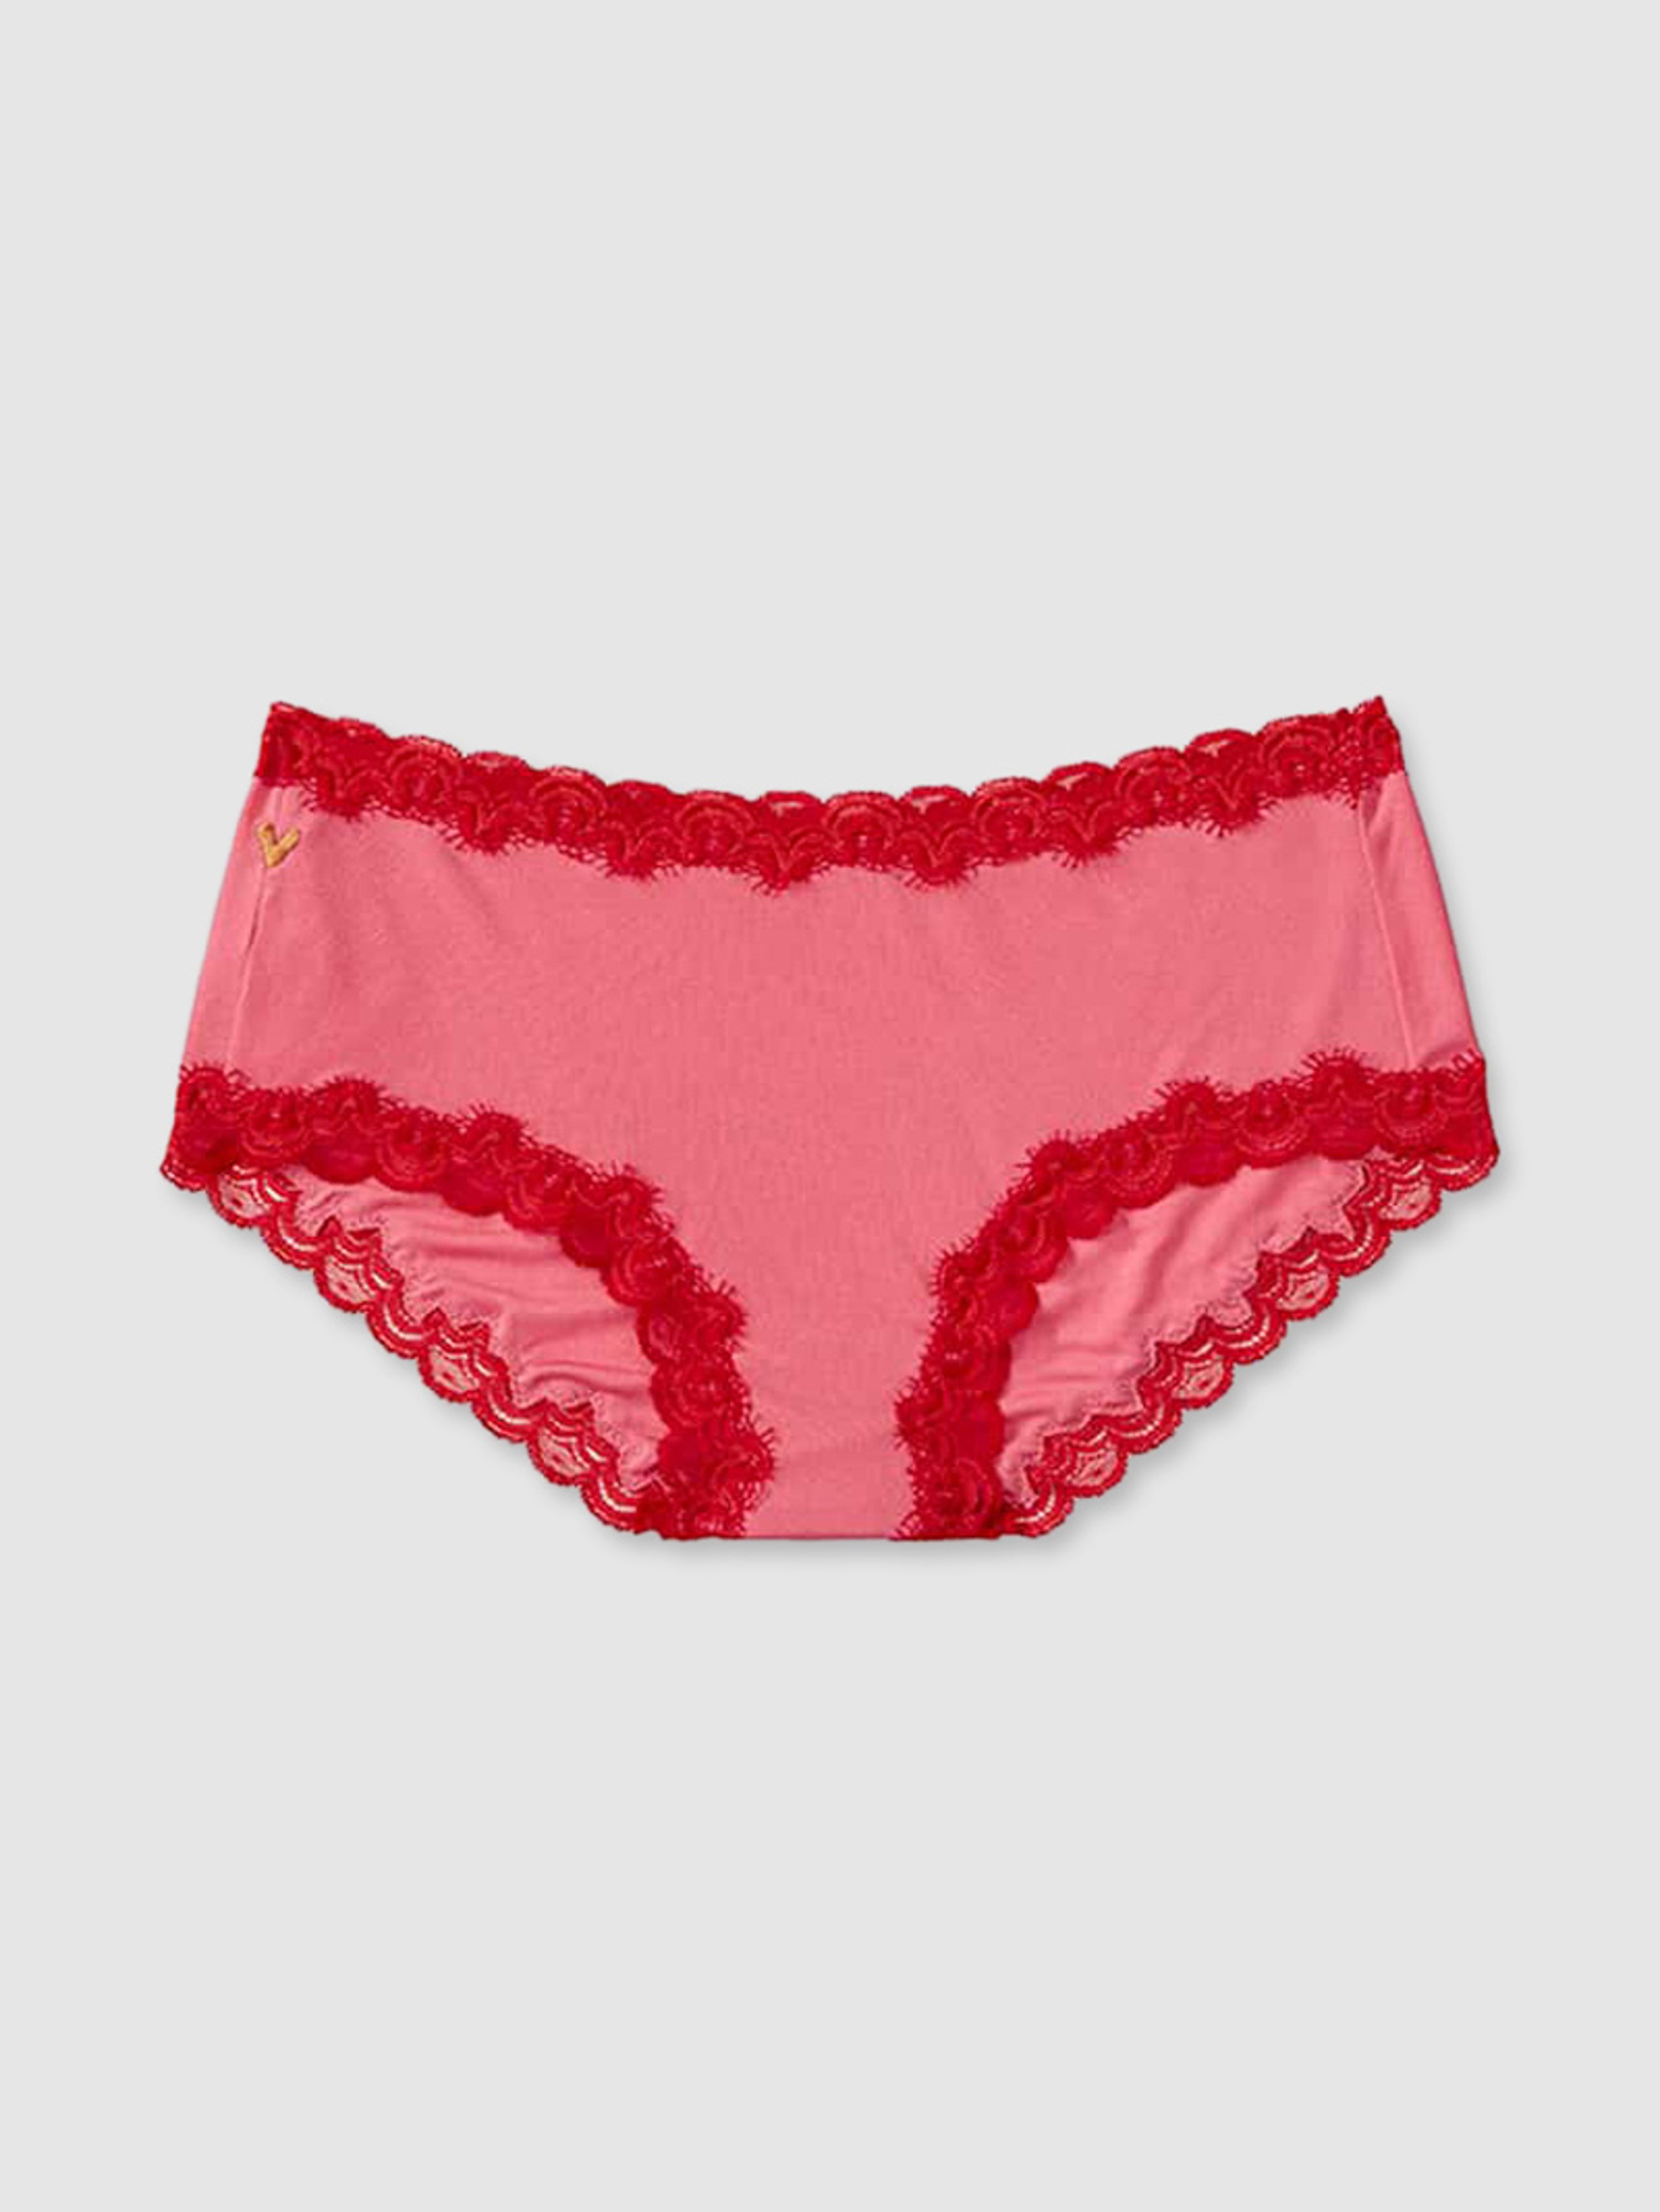 Uwila Warrior Soft Silks With Contrast Lace Panties In Red